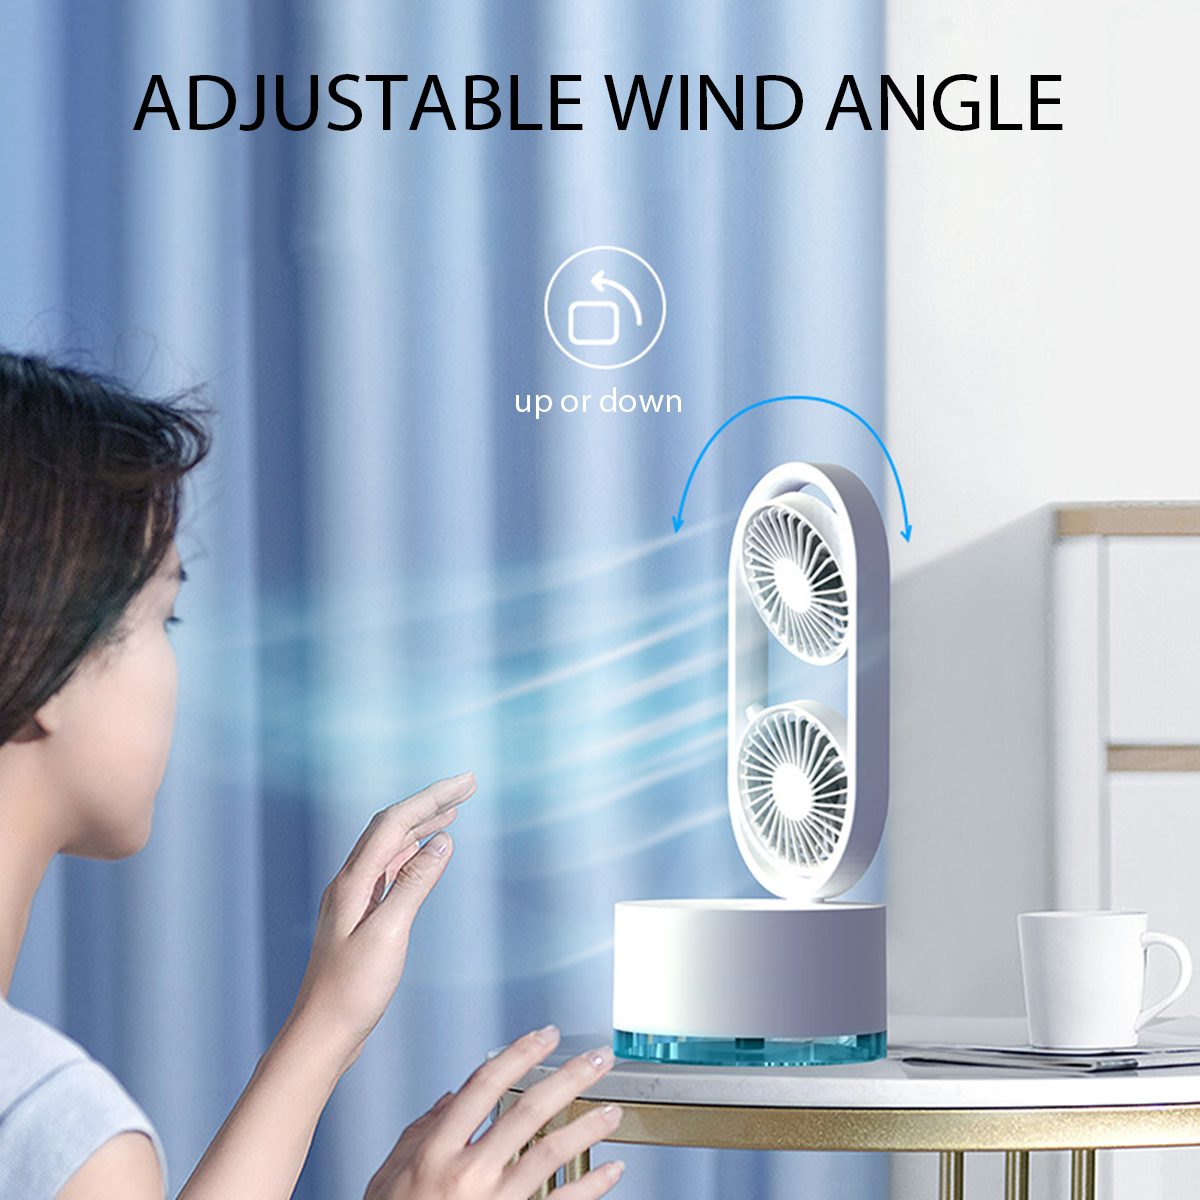 Mini-Dual-Head-Fan-3-Speeds-USB-Rechargeable-Air-Condition-Fan-400ml-Water-Tank-Spray-Humidification-1846006-6